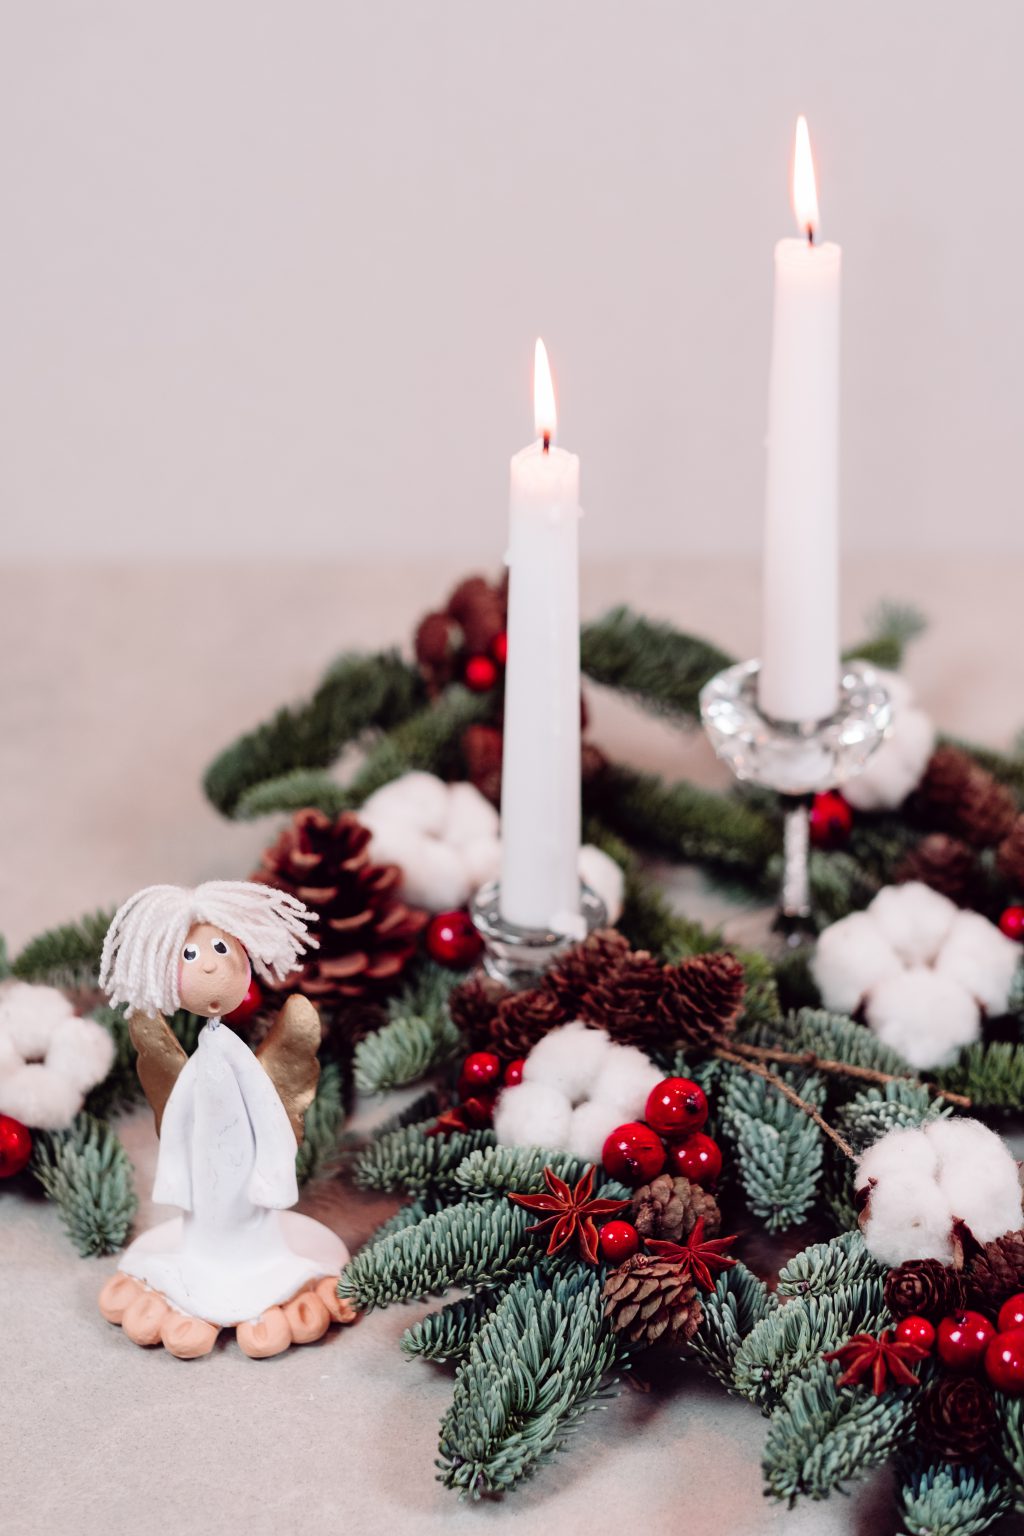 Christmas spruce decoration with candles and an angel 2 - free stock photo